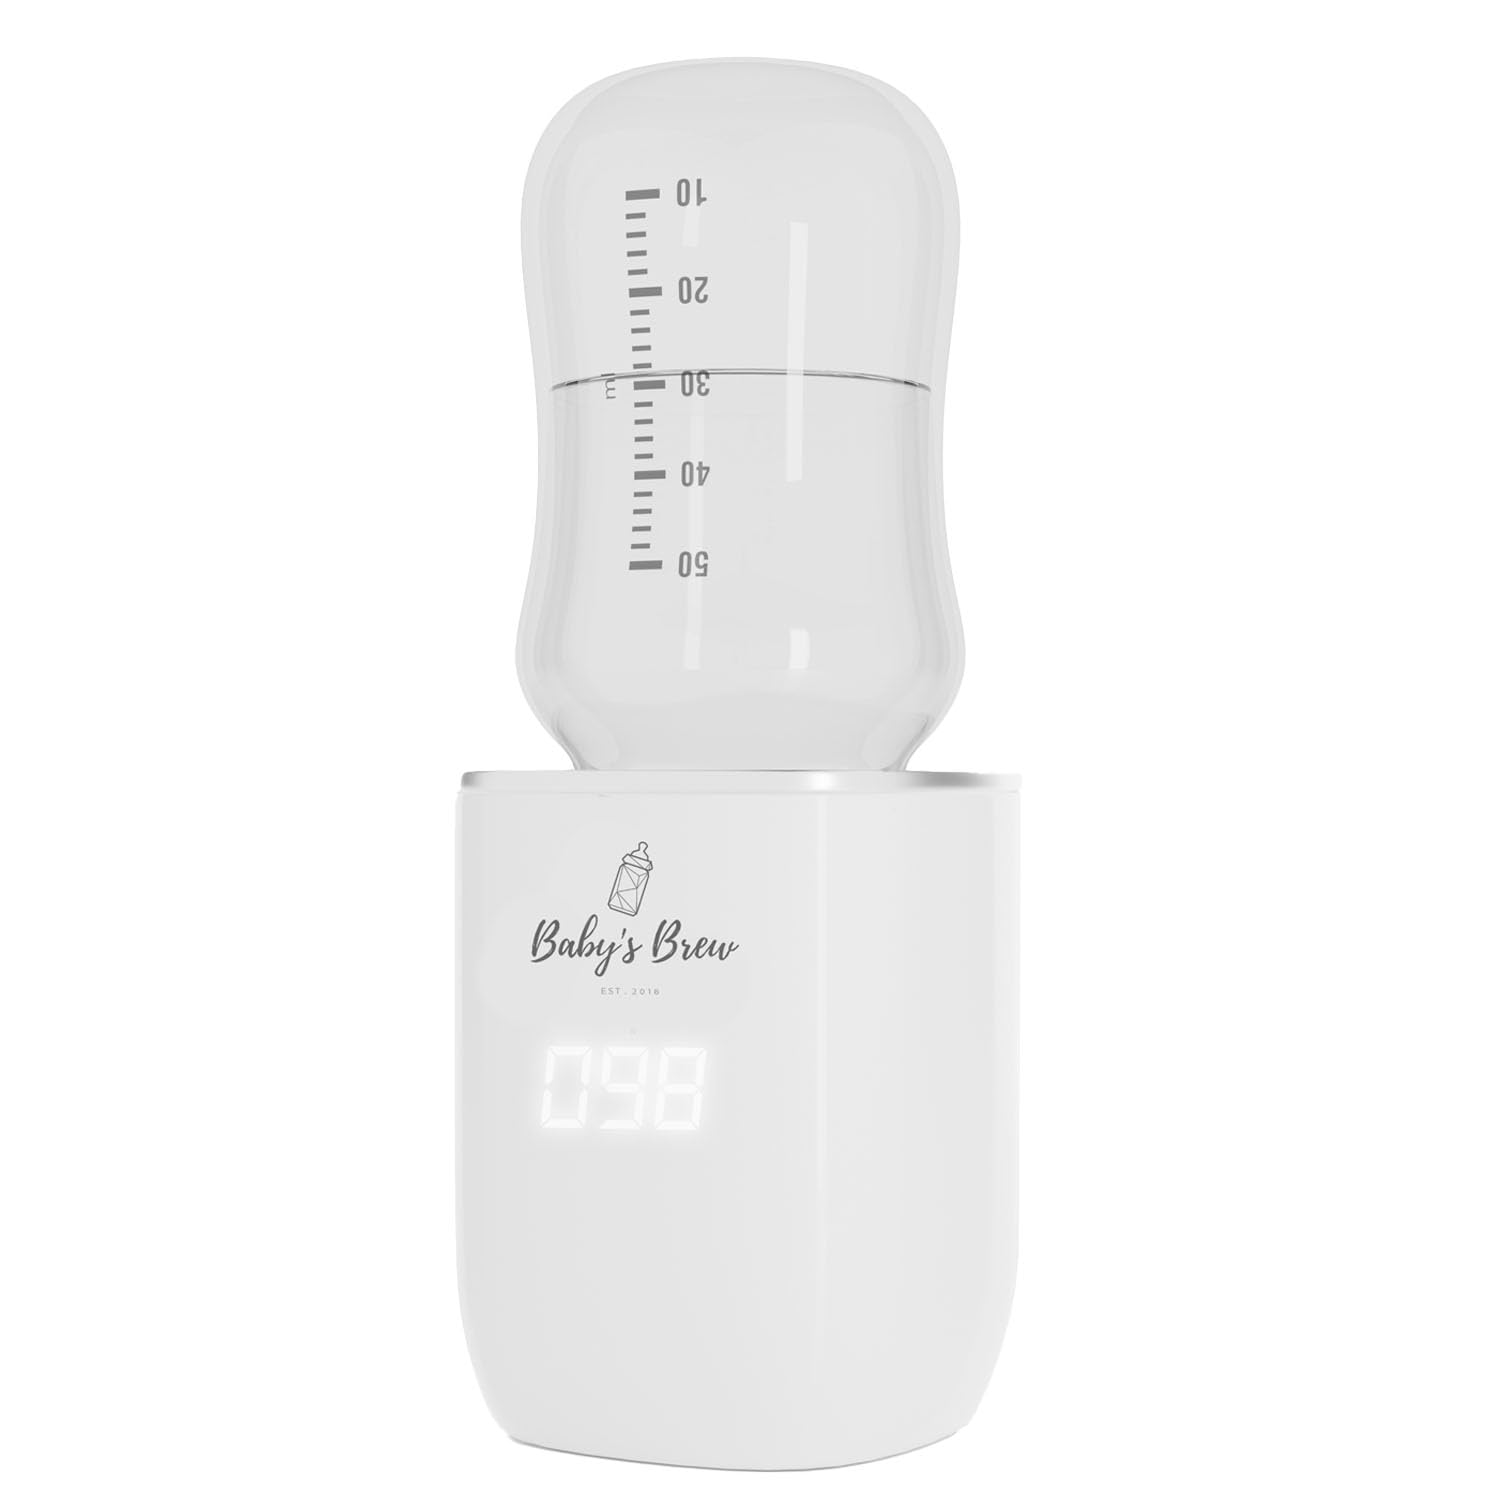 Baby's Brew Portable Bottle Warmer Pro - Milk Warmers for Breastmilk or Formula, Leak-Proof Design, Travel-Friendly, Cordless, Battery-Powered, 8-12 Hour Battery Life, Warmer Only